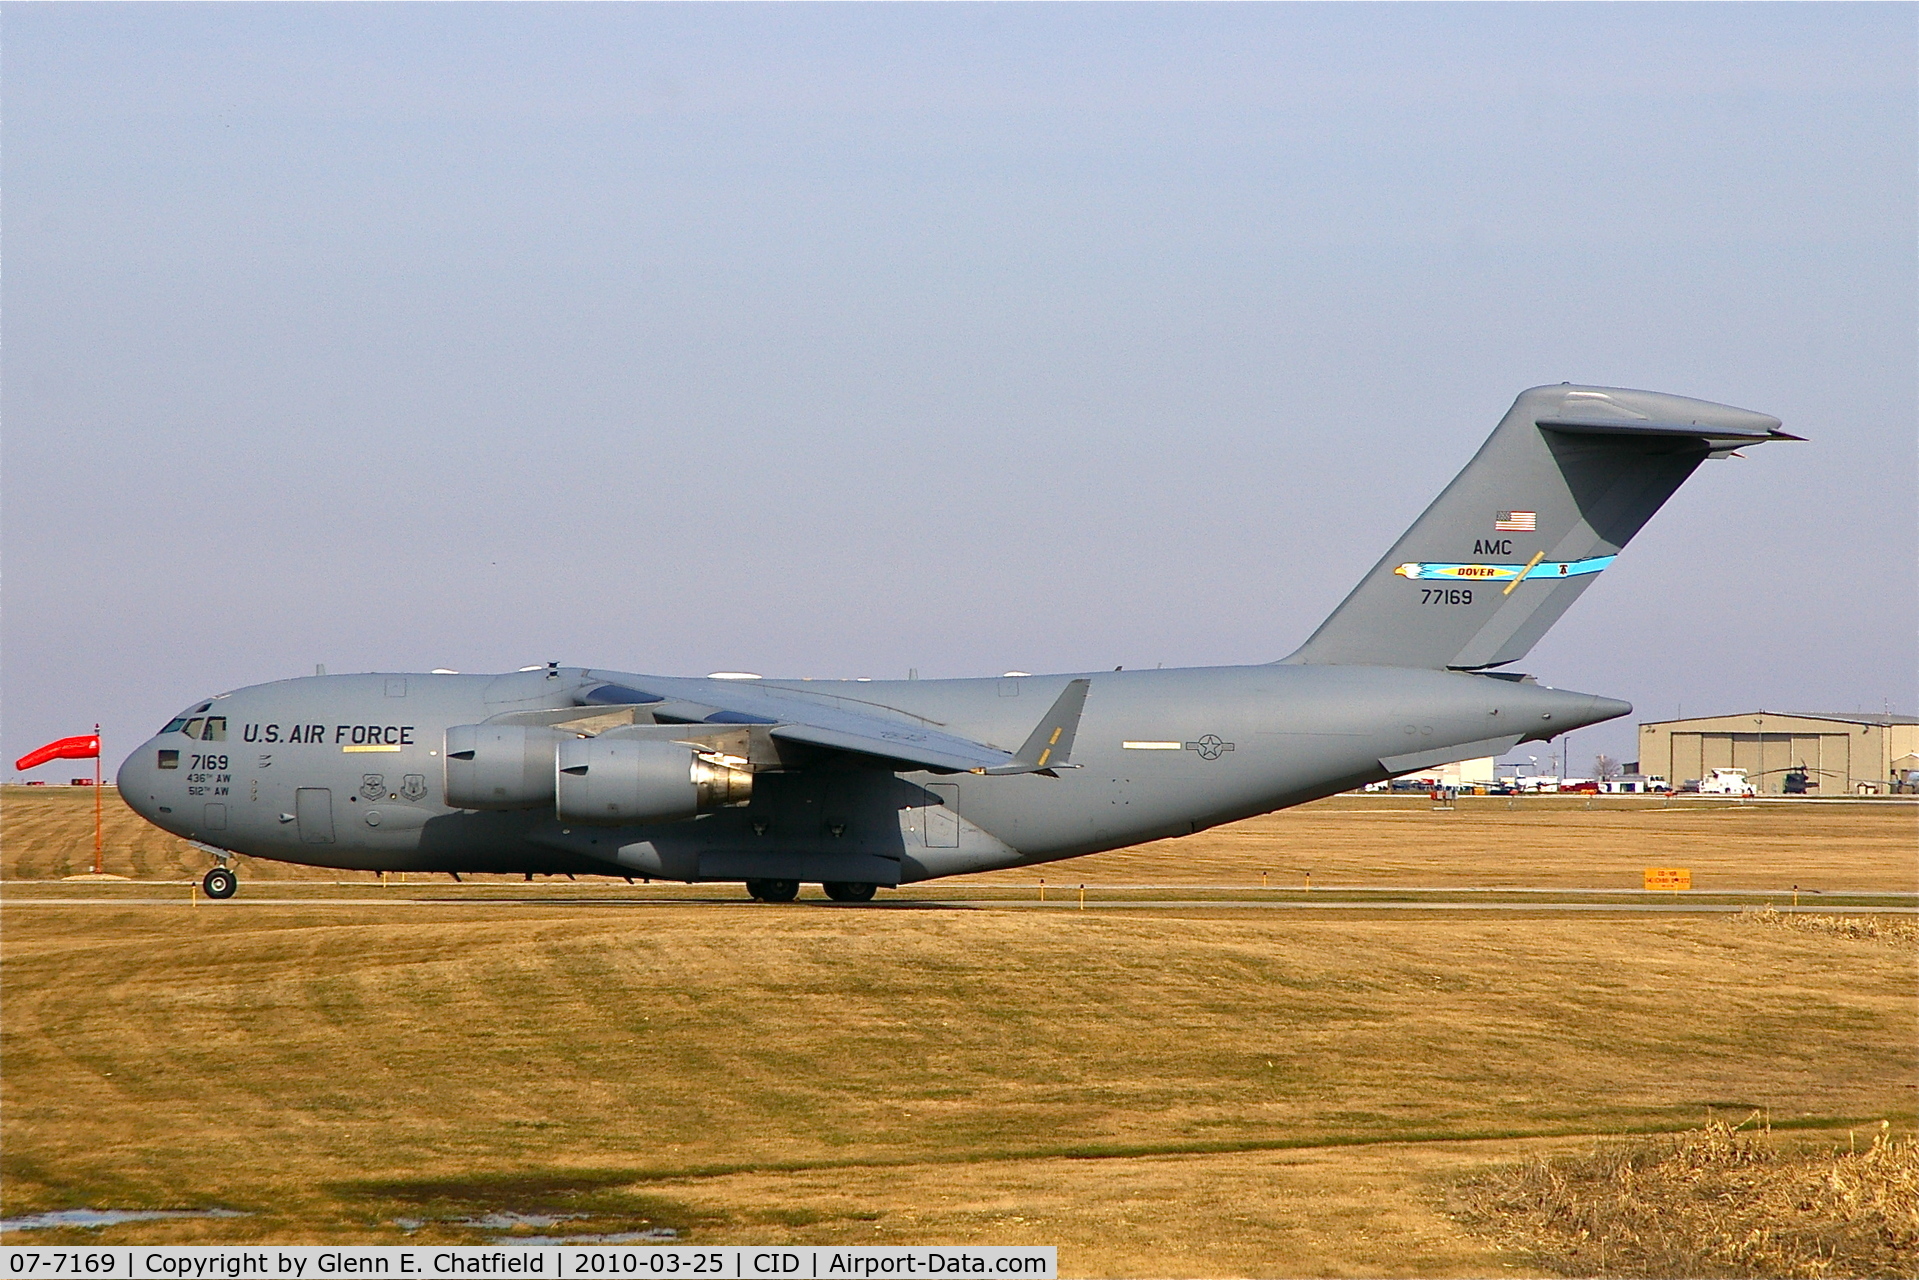 07-7169, 2007 Boeing C-17A Globemaster III C/N F-179/P-169, Presidential support aircraft parked on taxiway C